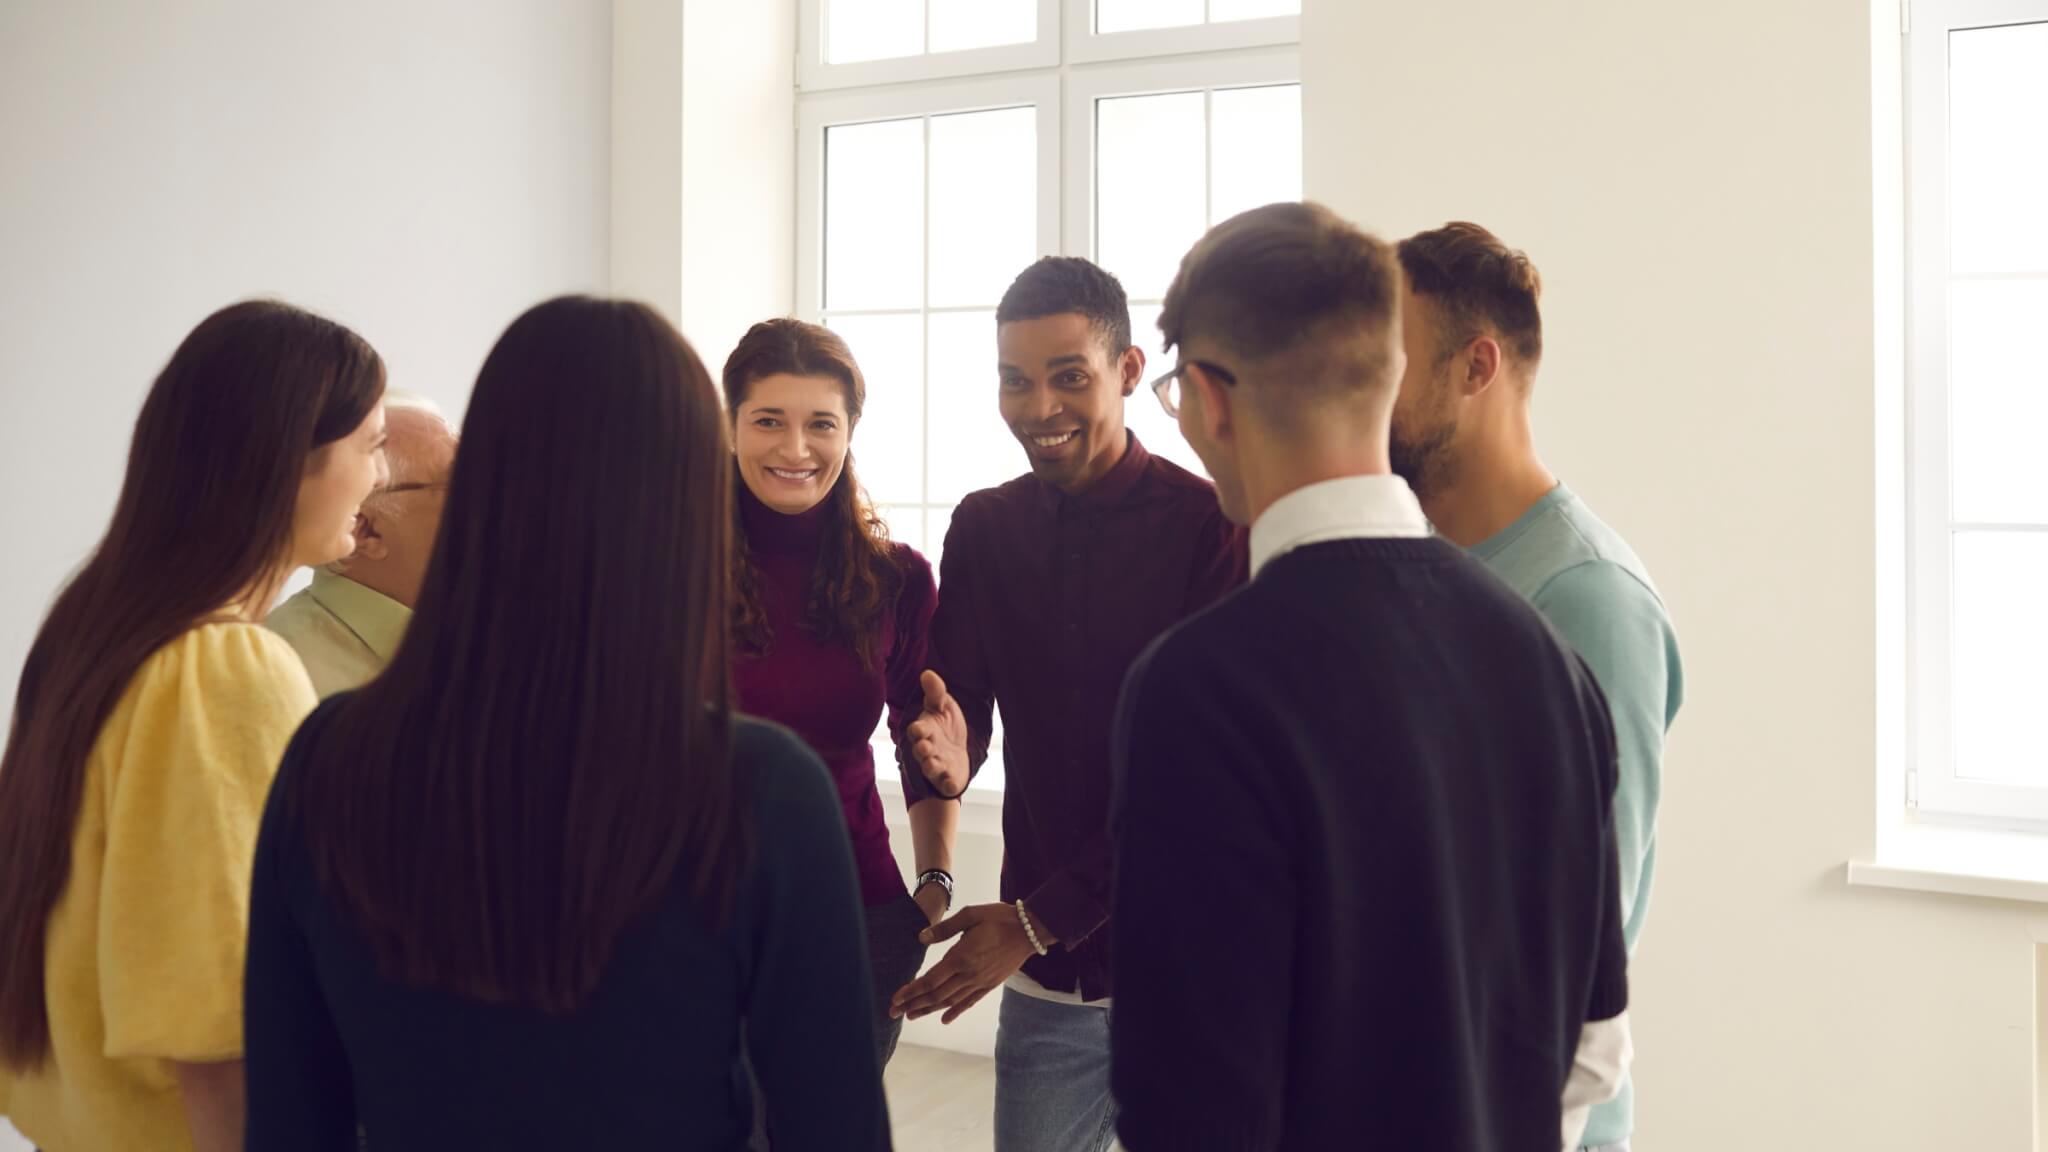 The Best Icebreaker Questions for Team Meetings